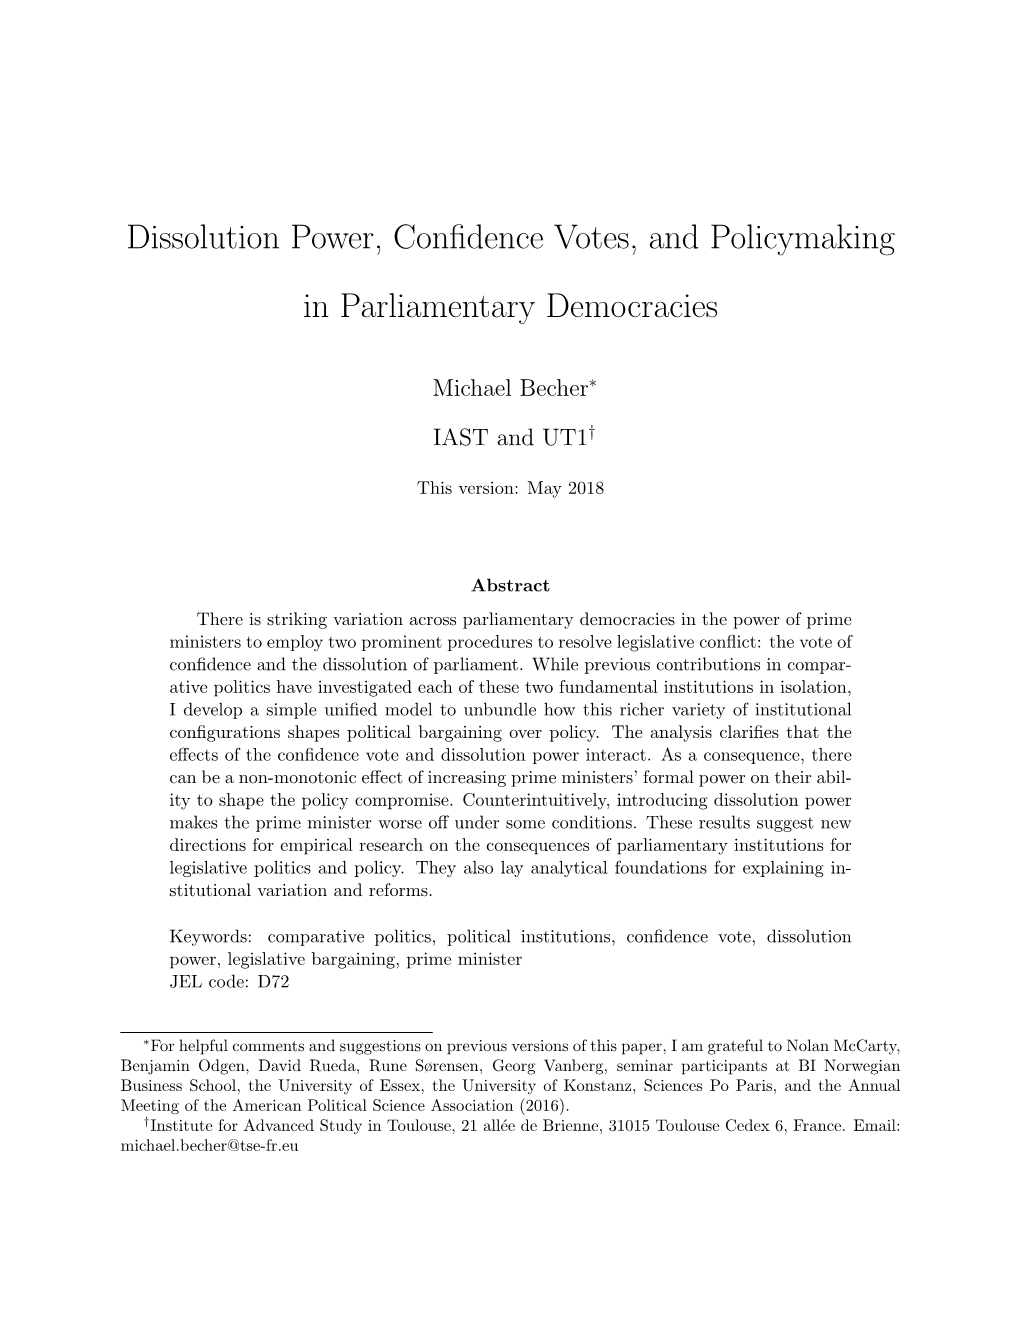 Dissolution Power, Confidence Votes, and Policymaking in Parliamentary